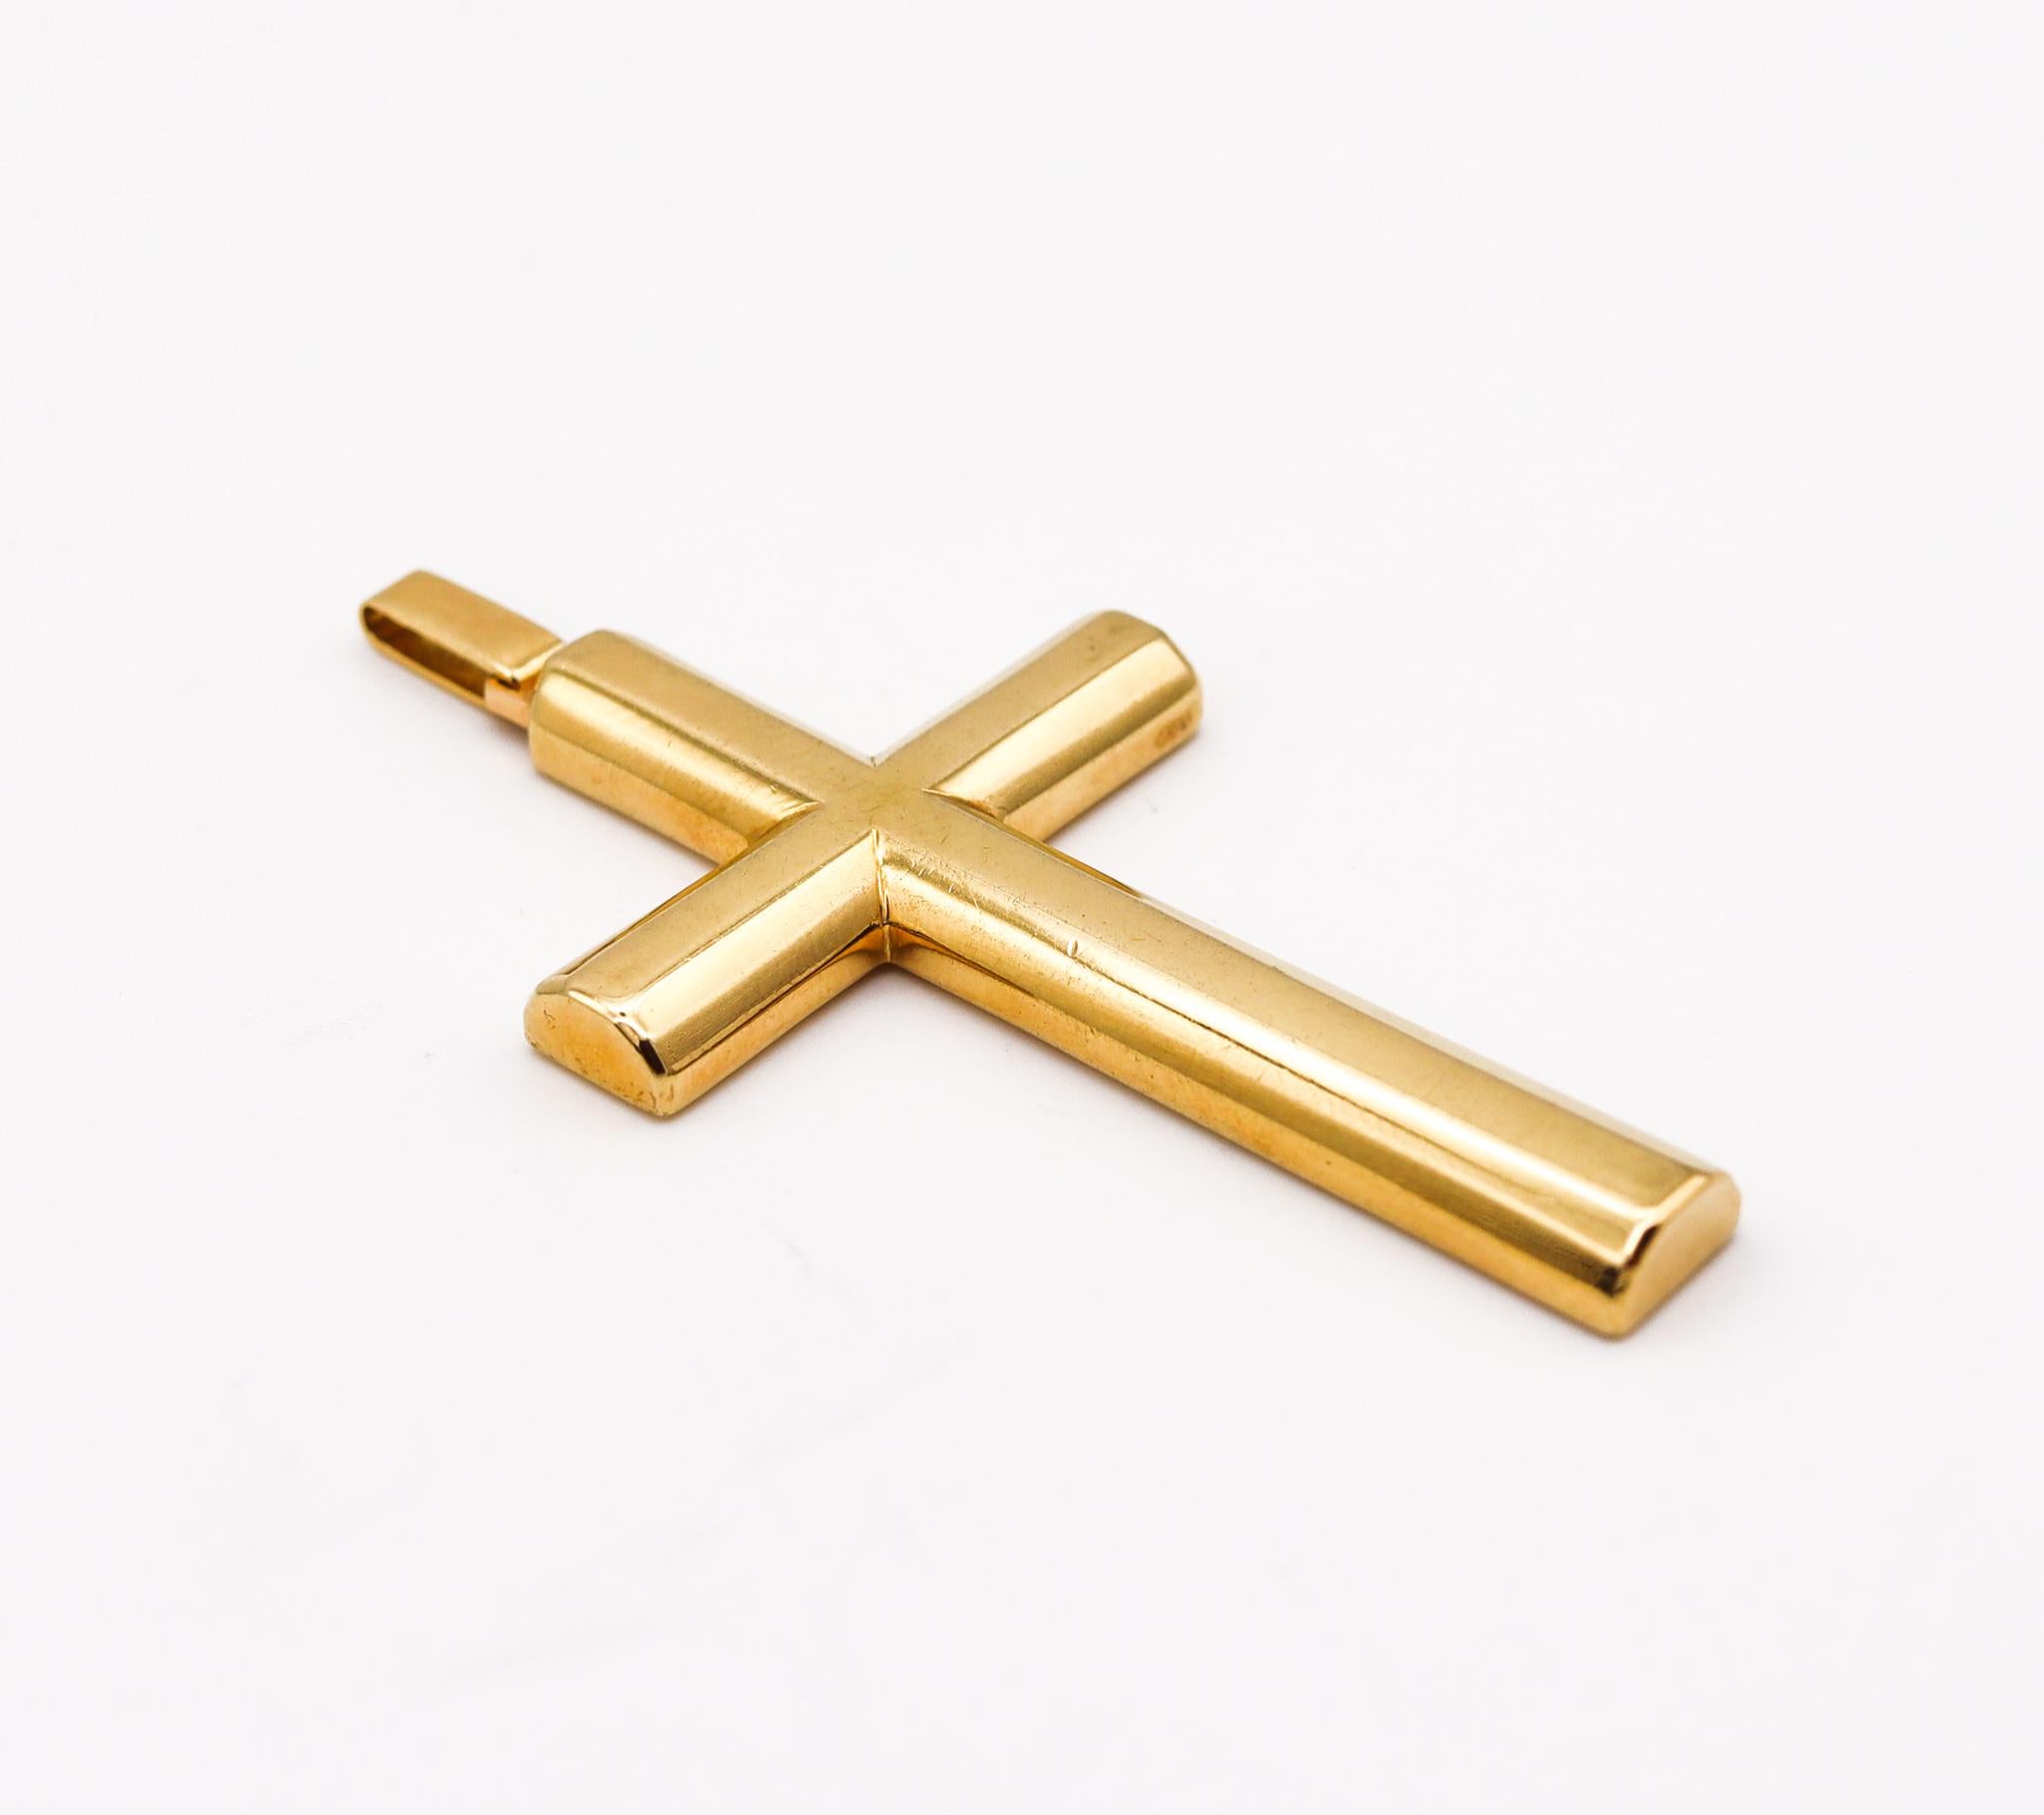 A geometric cross designed for Jil Sander by Jean Dinh Van.

Beautiful vintage piece, created in Paris France back in the 1980 at the atelier of the iconic jewelry designer Dinh Van. This geometric avant garde cross has been specially made in the